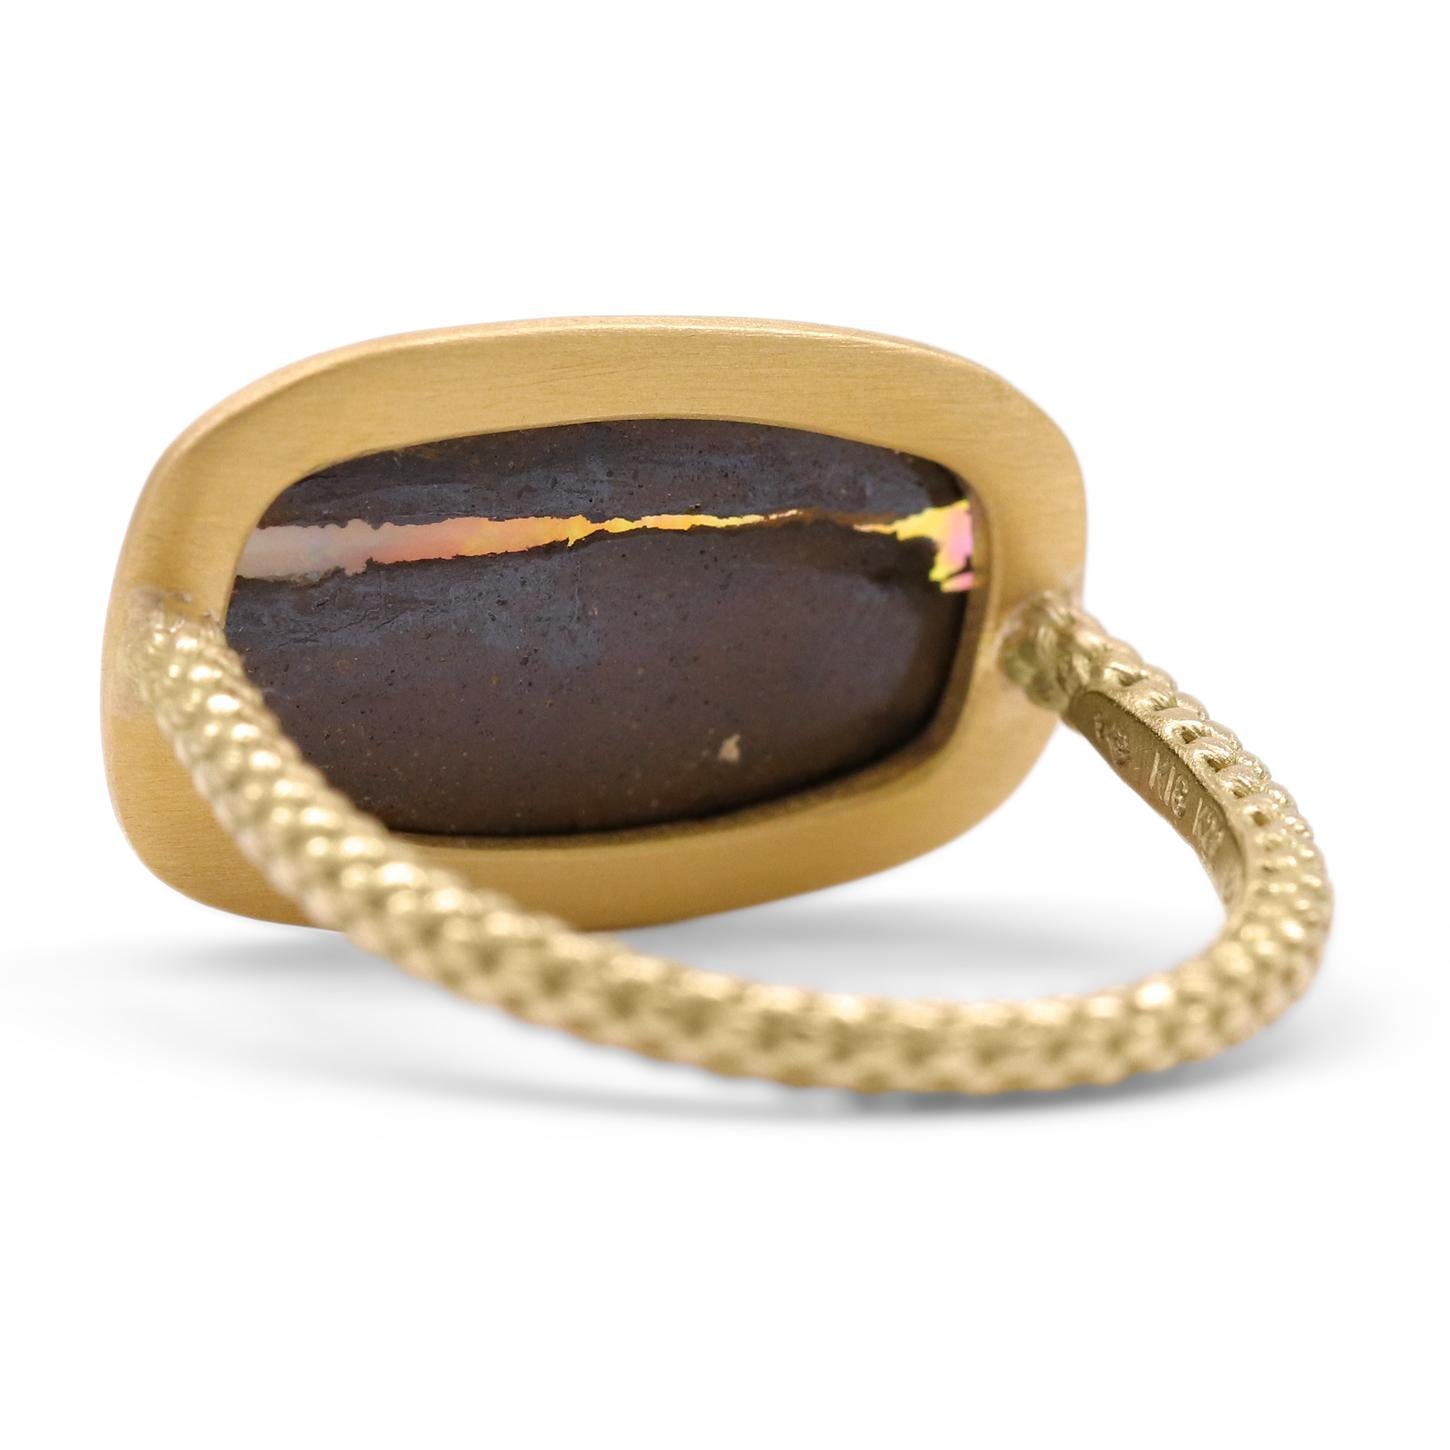 Precious Picture Opal 22K Gold Handmade One of a Kind Ring, Talkative, 2022 In New Condition For Sale In Dallas, TX